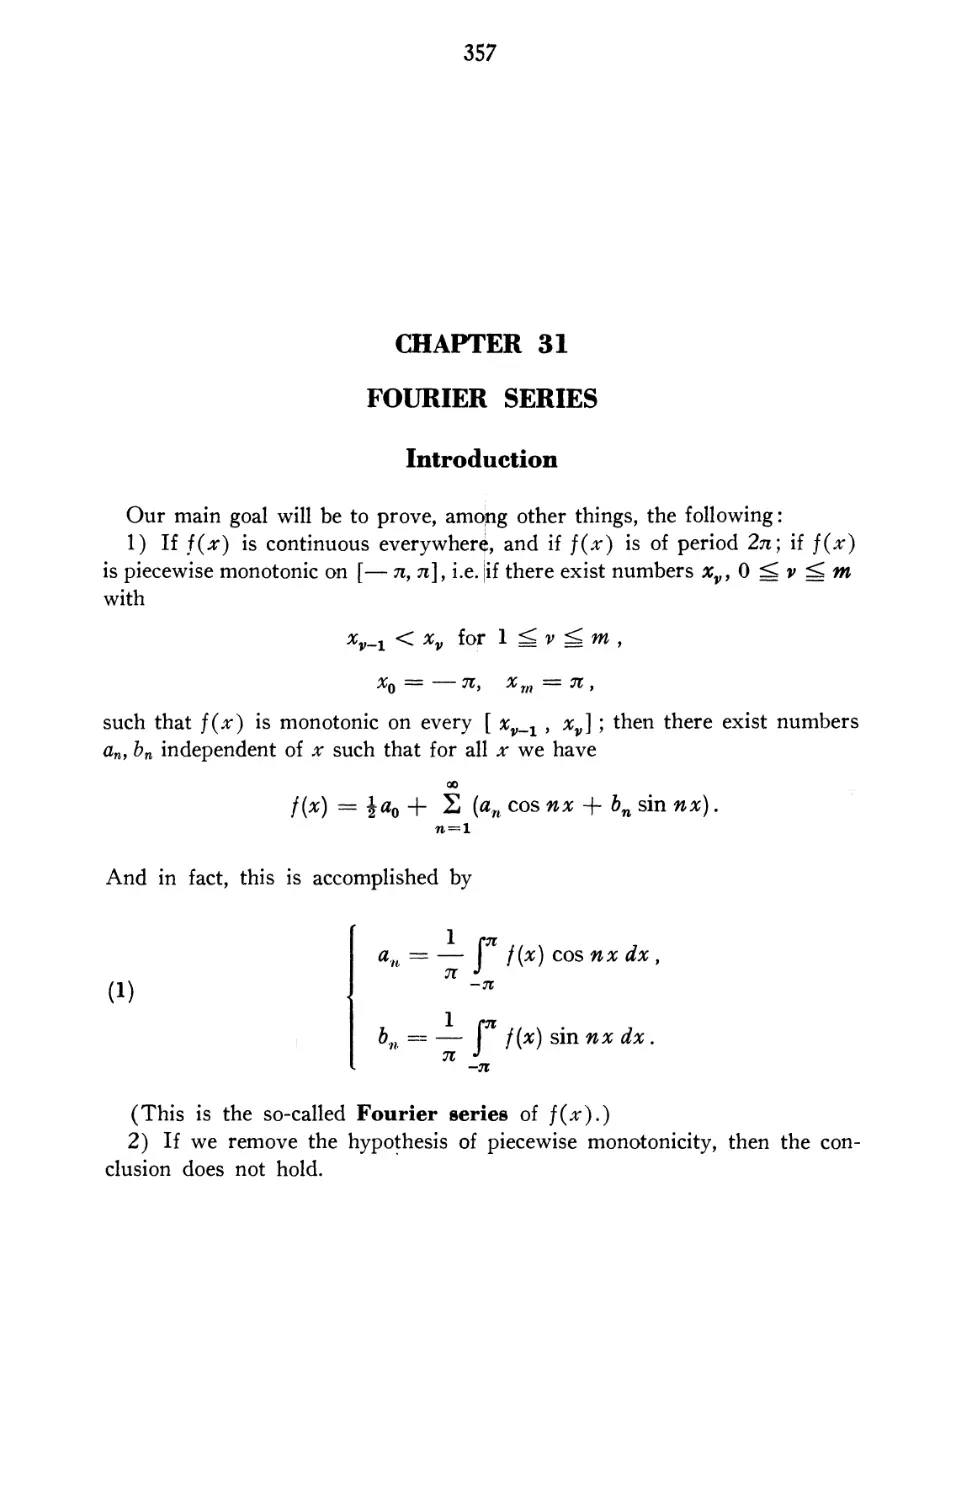 Chapter 31 Fourier Series